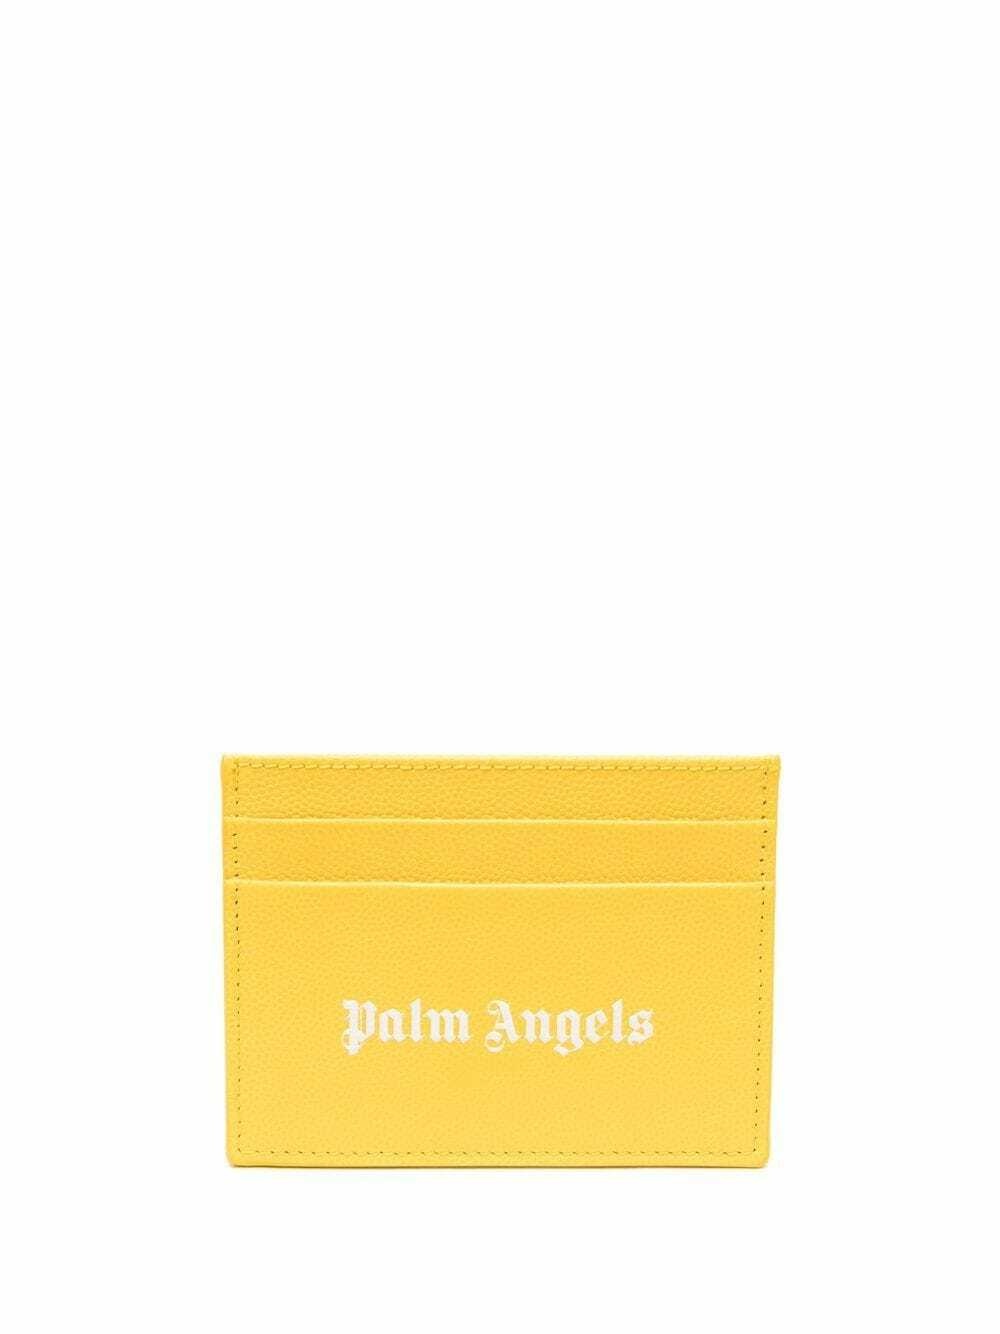 PALM ANGELS - Leather Credit Card Case Palm Angels